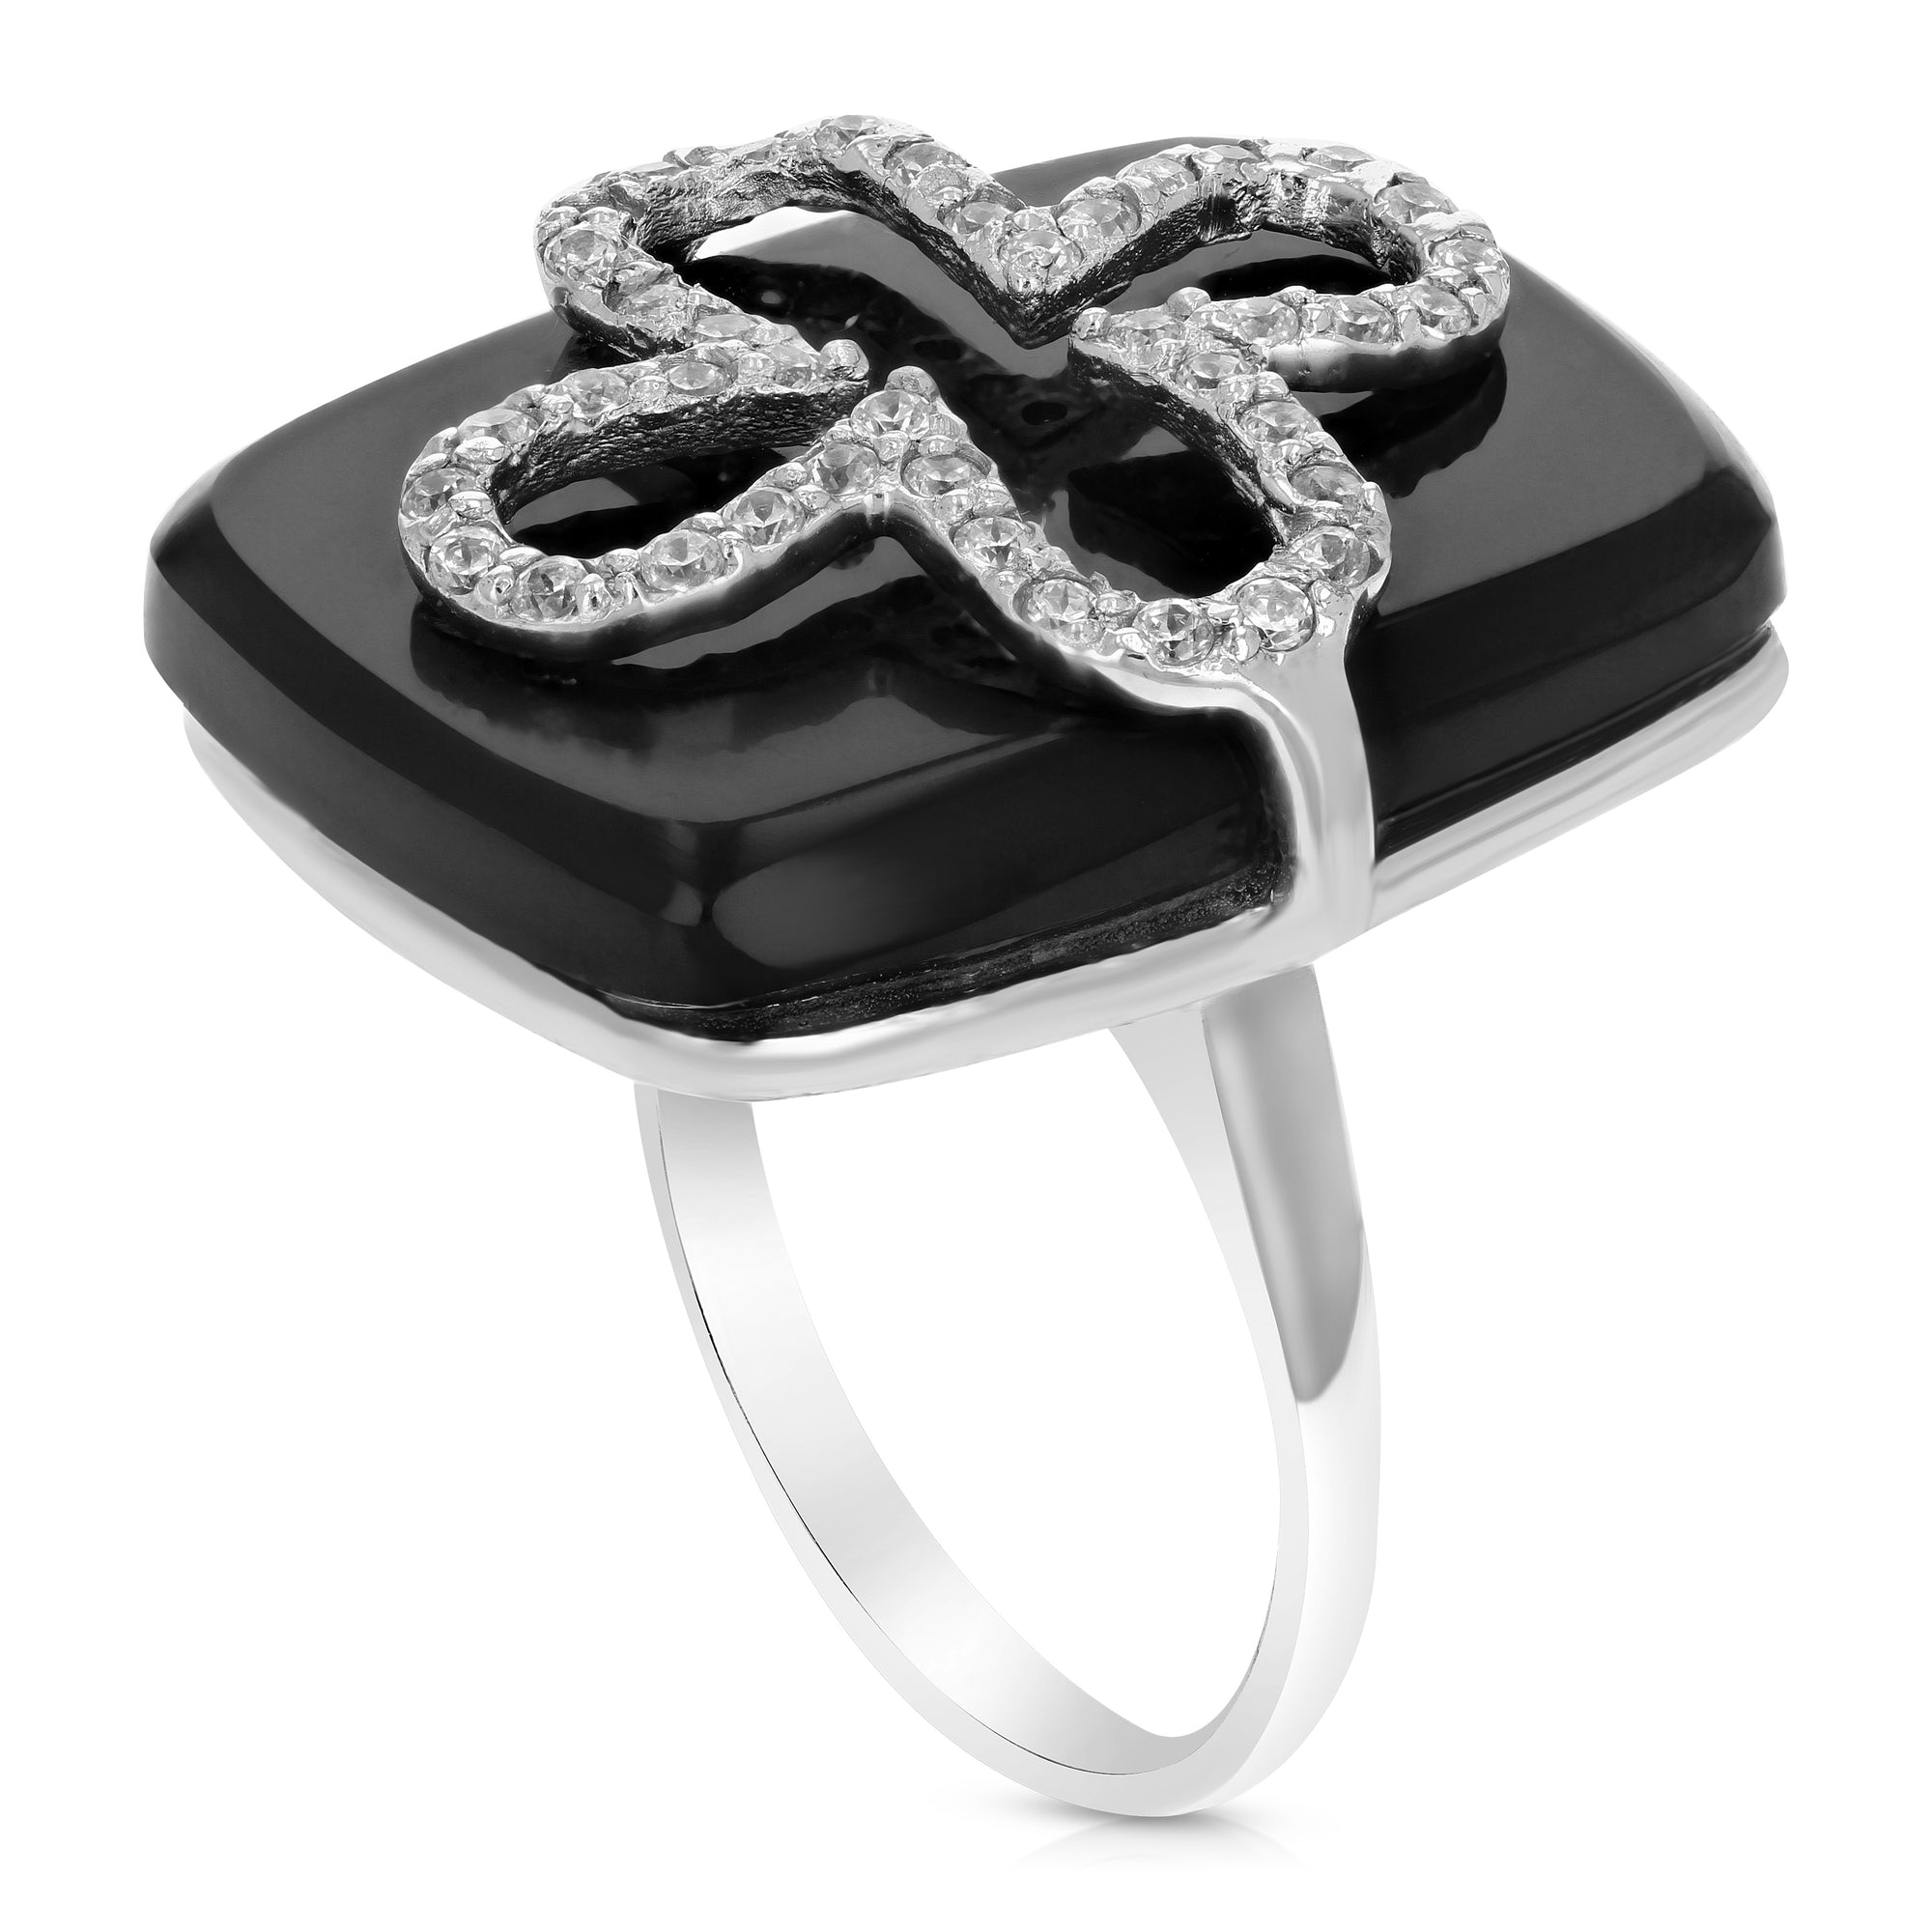 10 cttw Black Onyx Ring .925 Sterling Silver with Rhodium Plating Emerald Shape